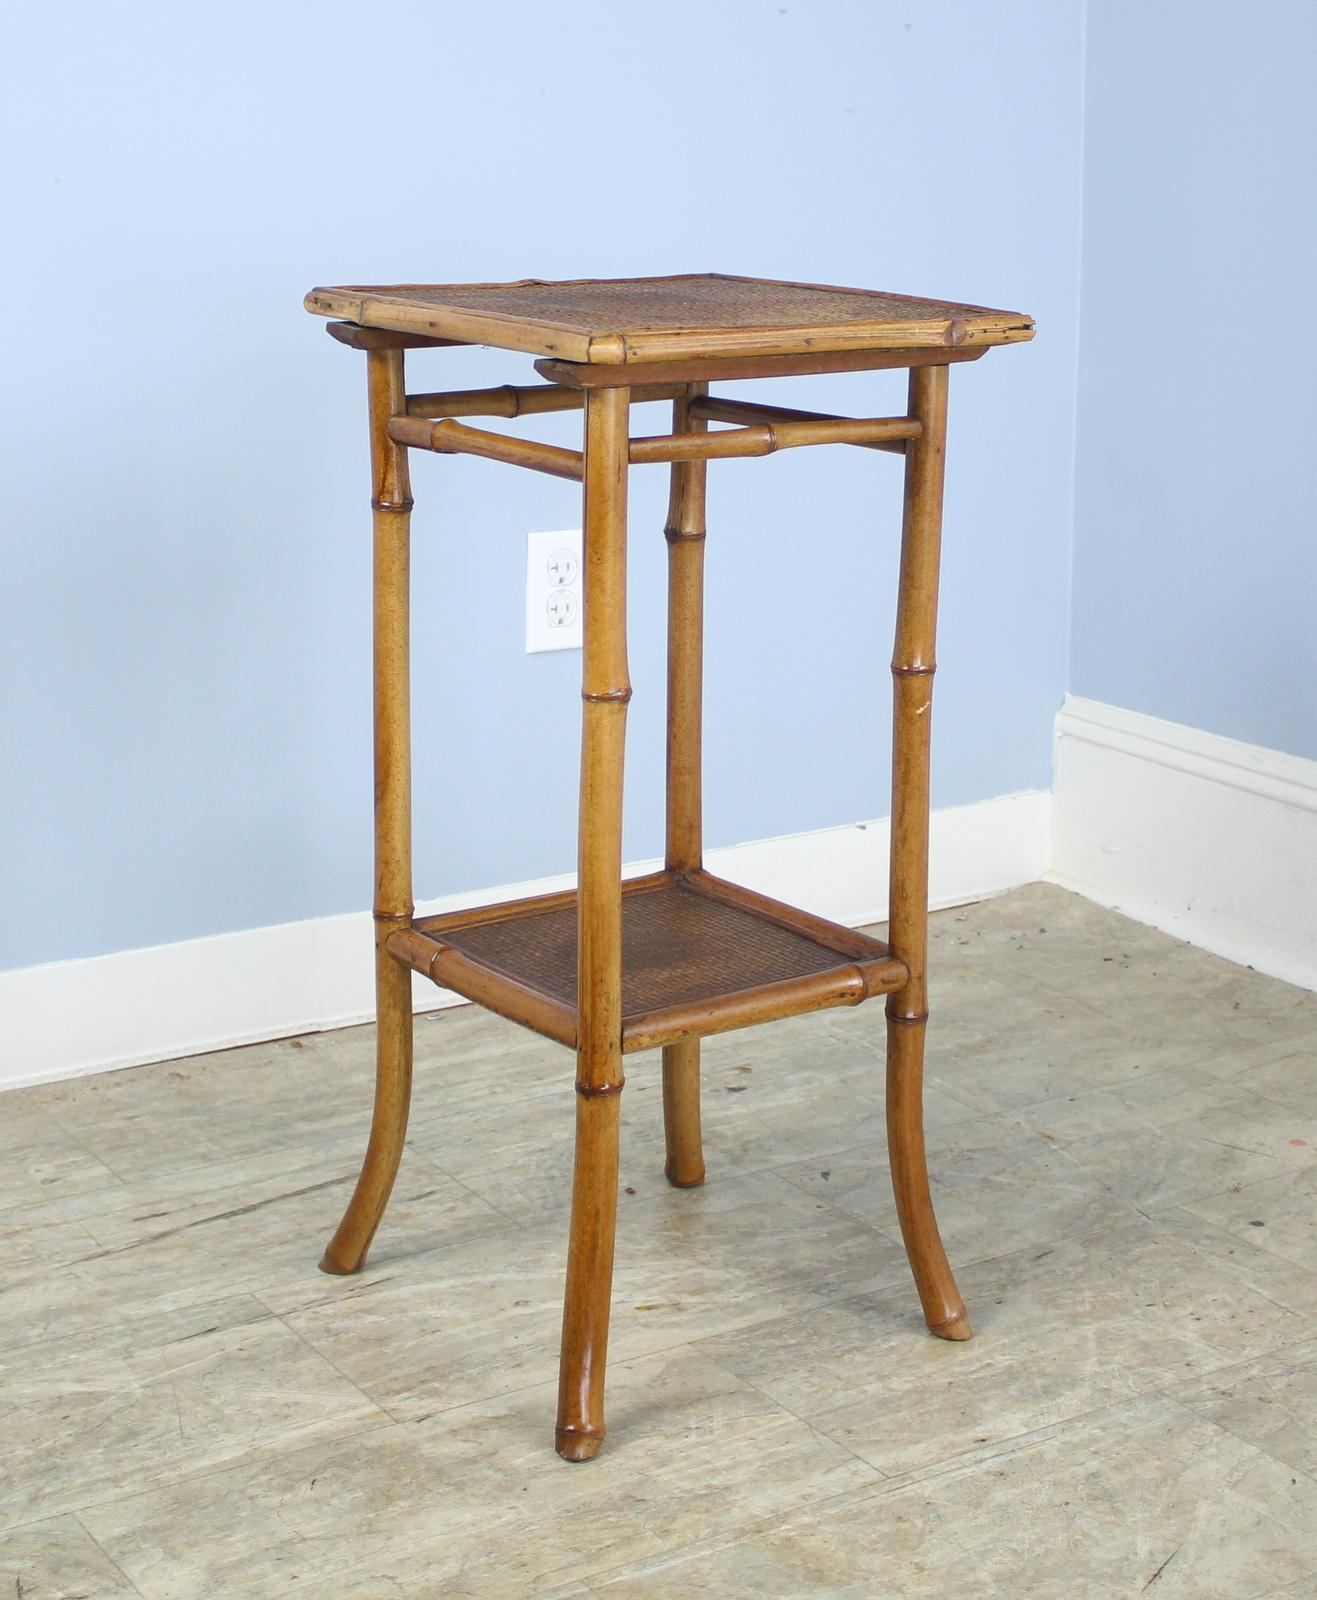 An antique English bamboo side table, with flared legs and with two shelves. Both shelves are made of tightly woven rattan that is in good condition. The bamboo is in good sturdy condition. Charming as an end or lamp table.